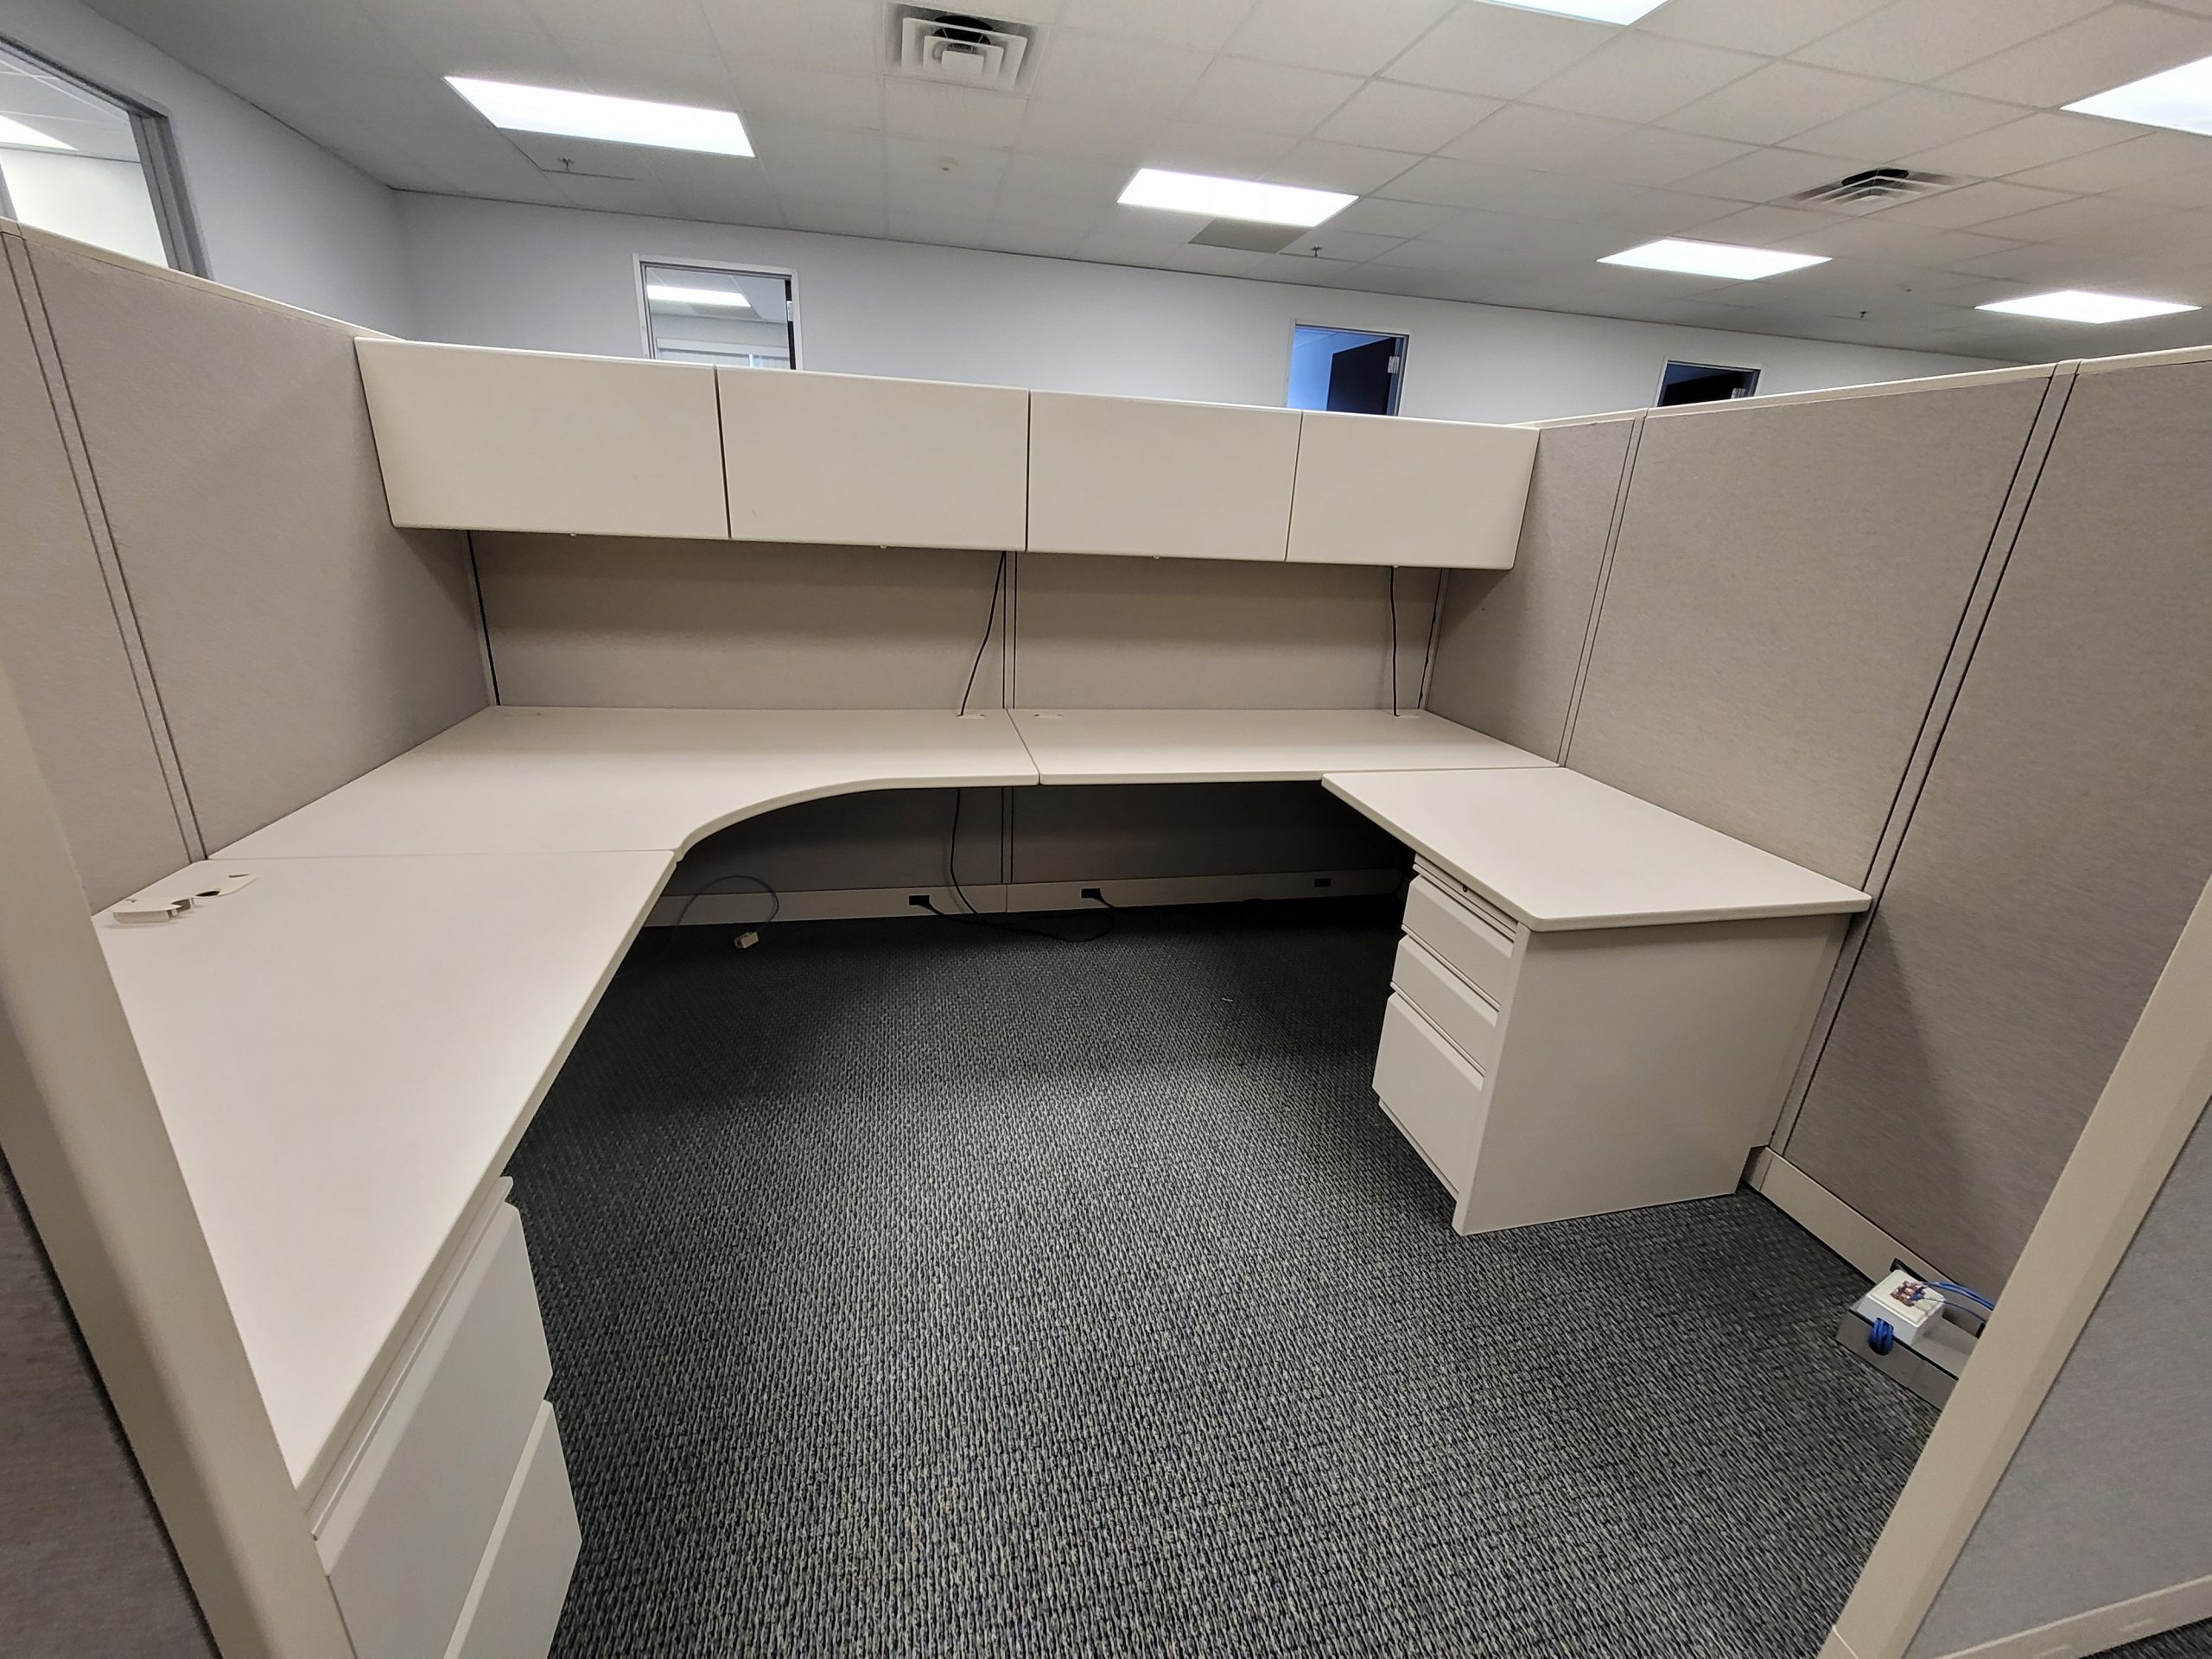 Office cubicle